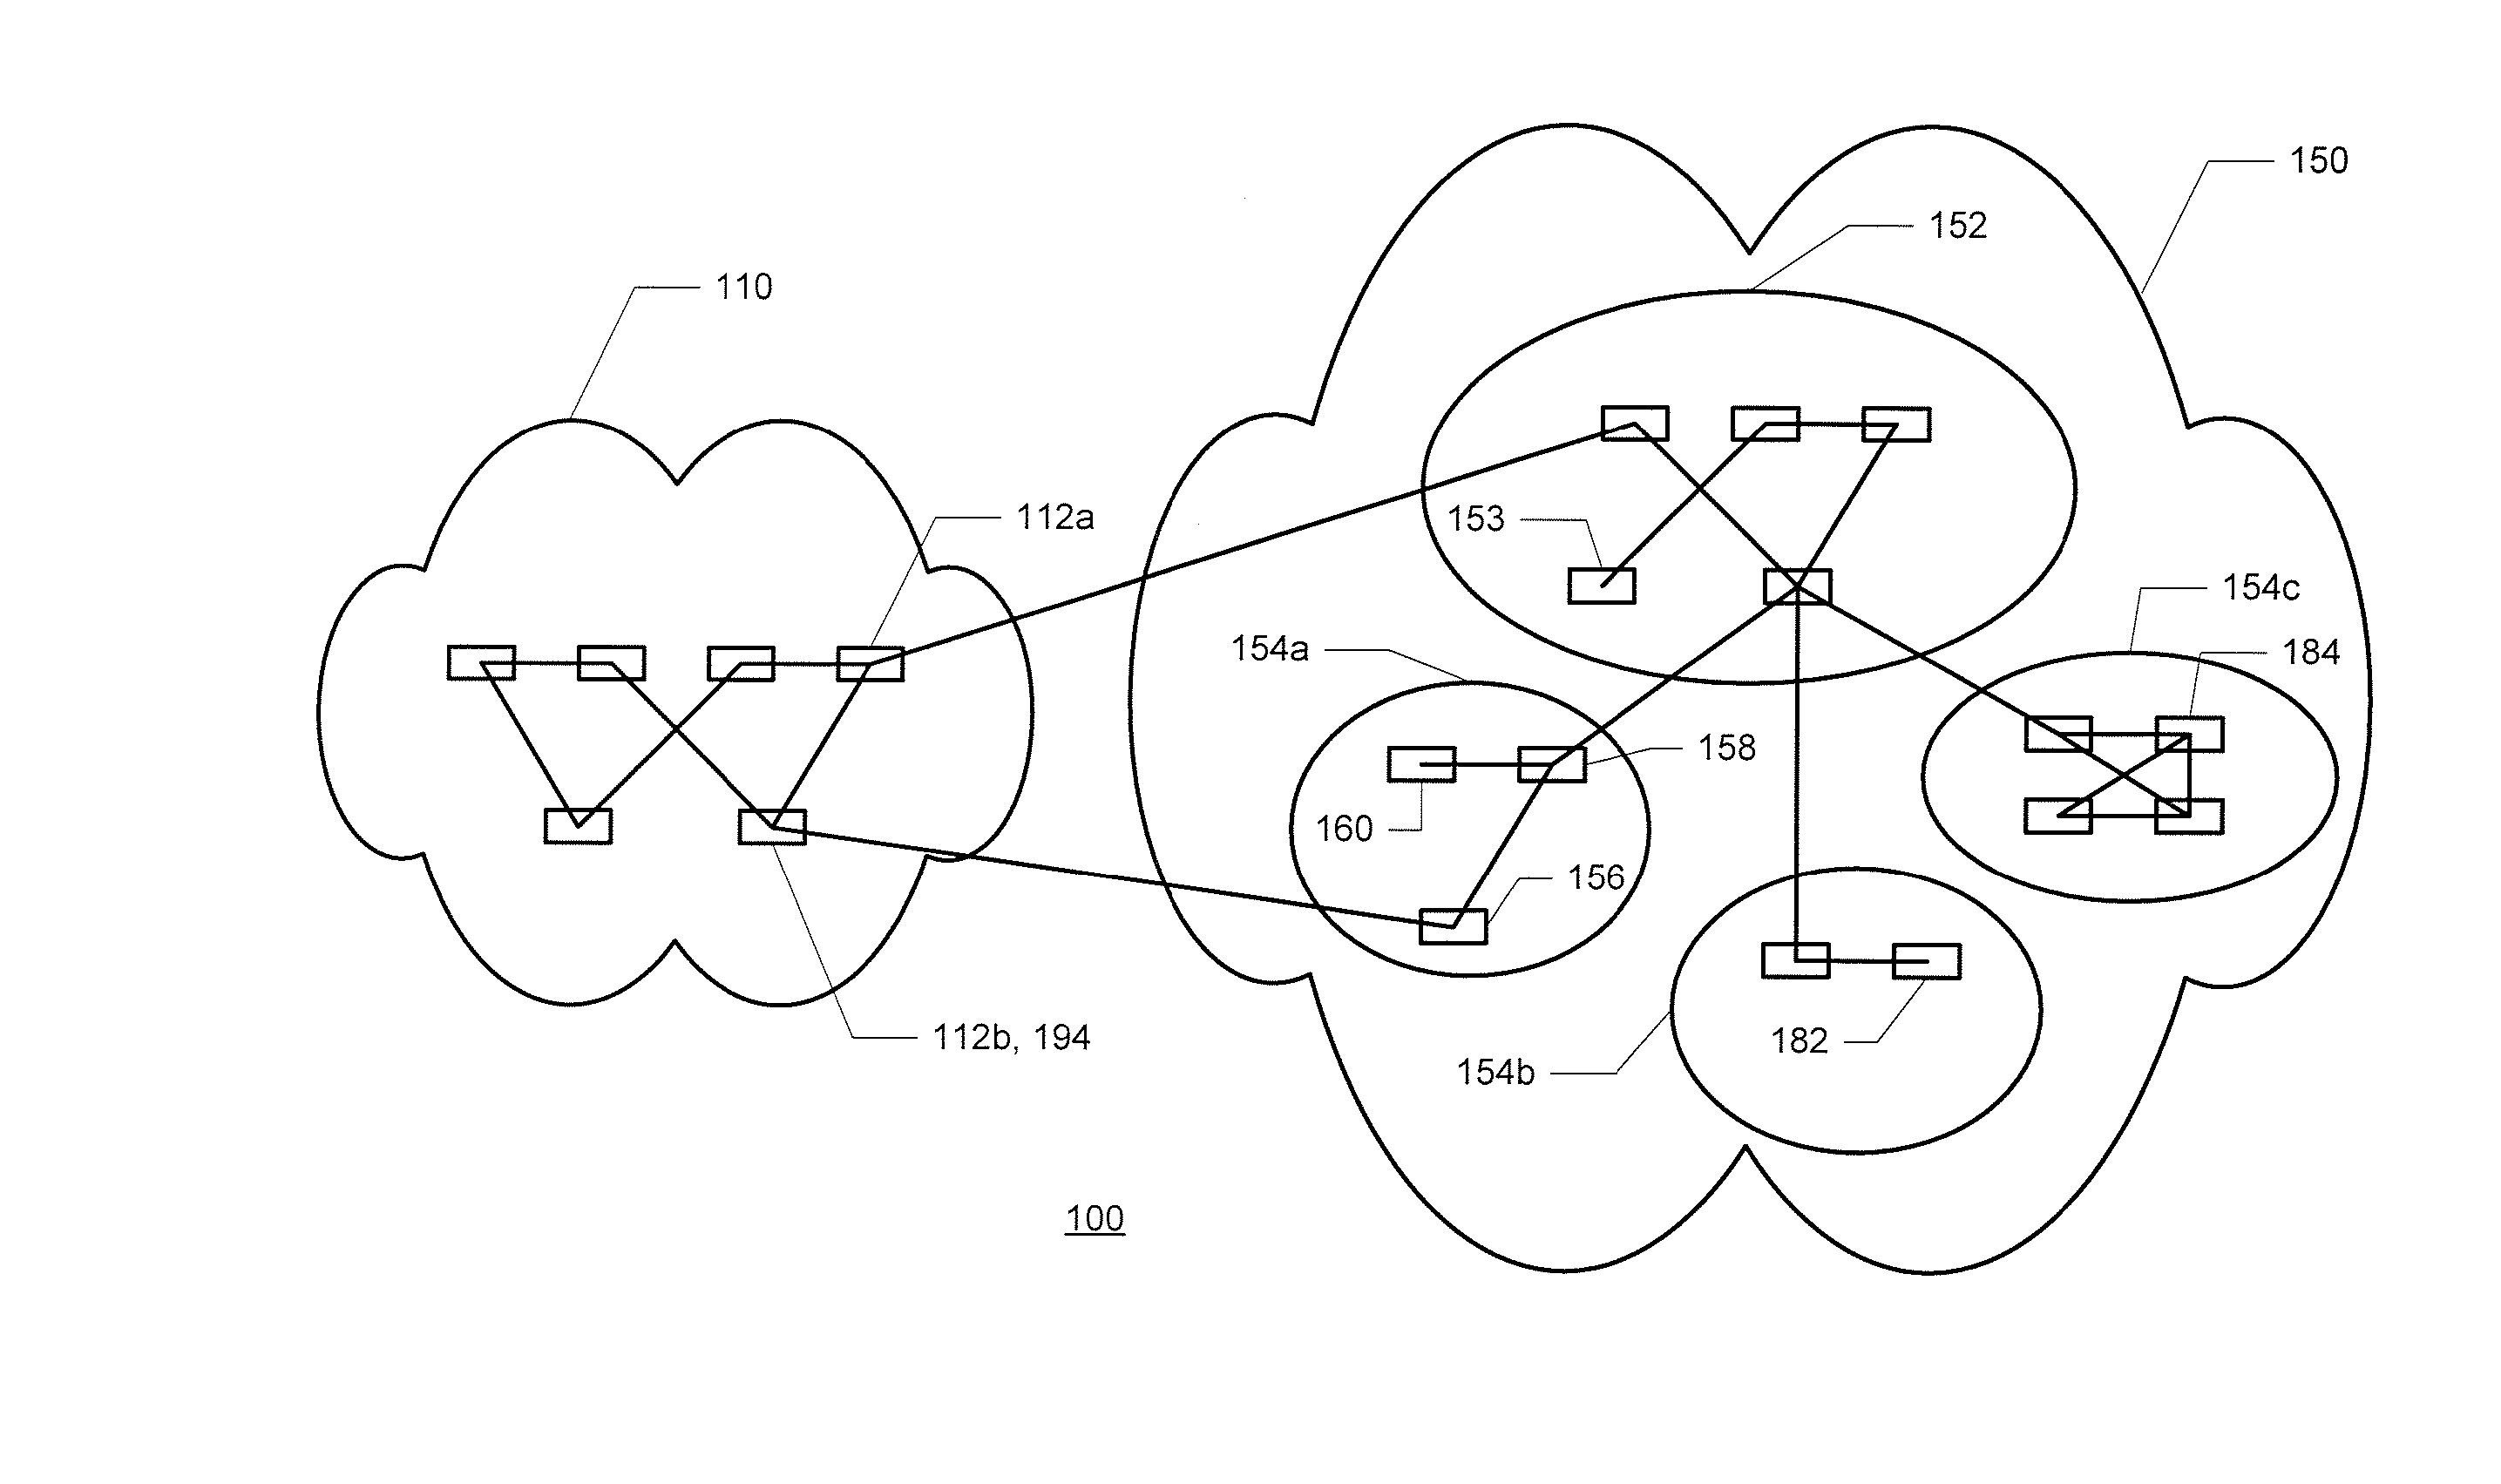 Communicating constraint information for determining a path subject to such constraints